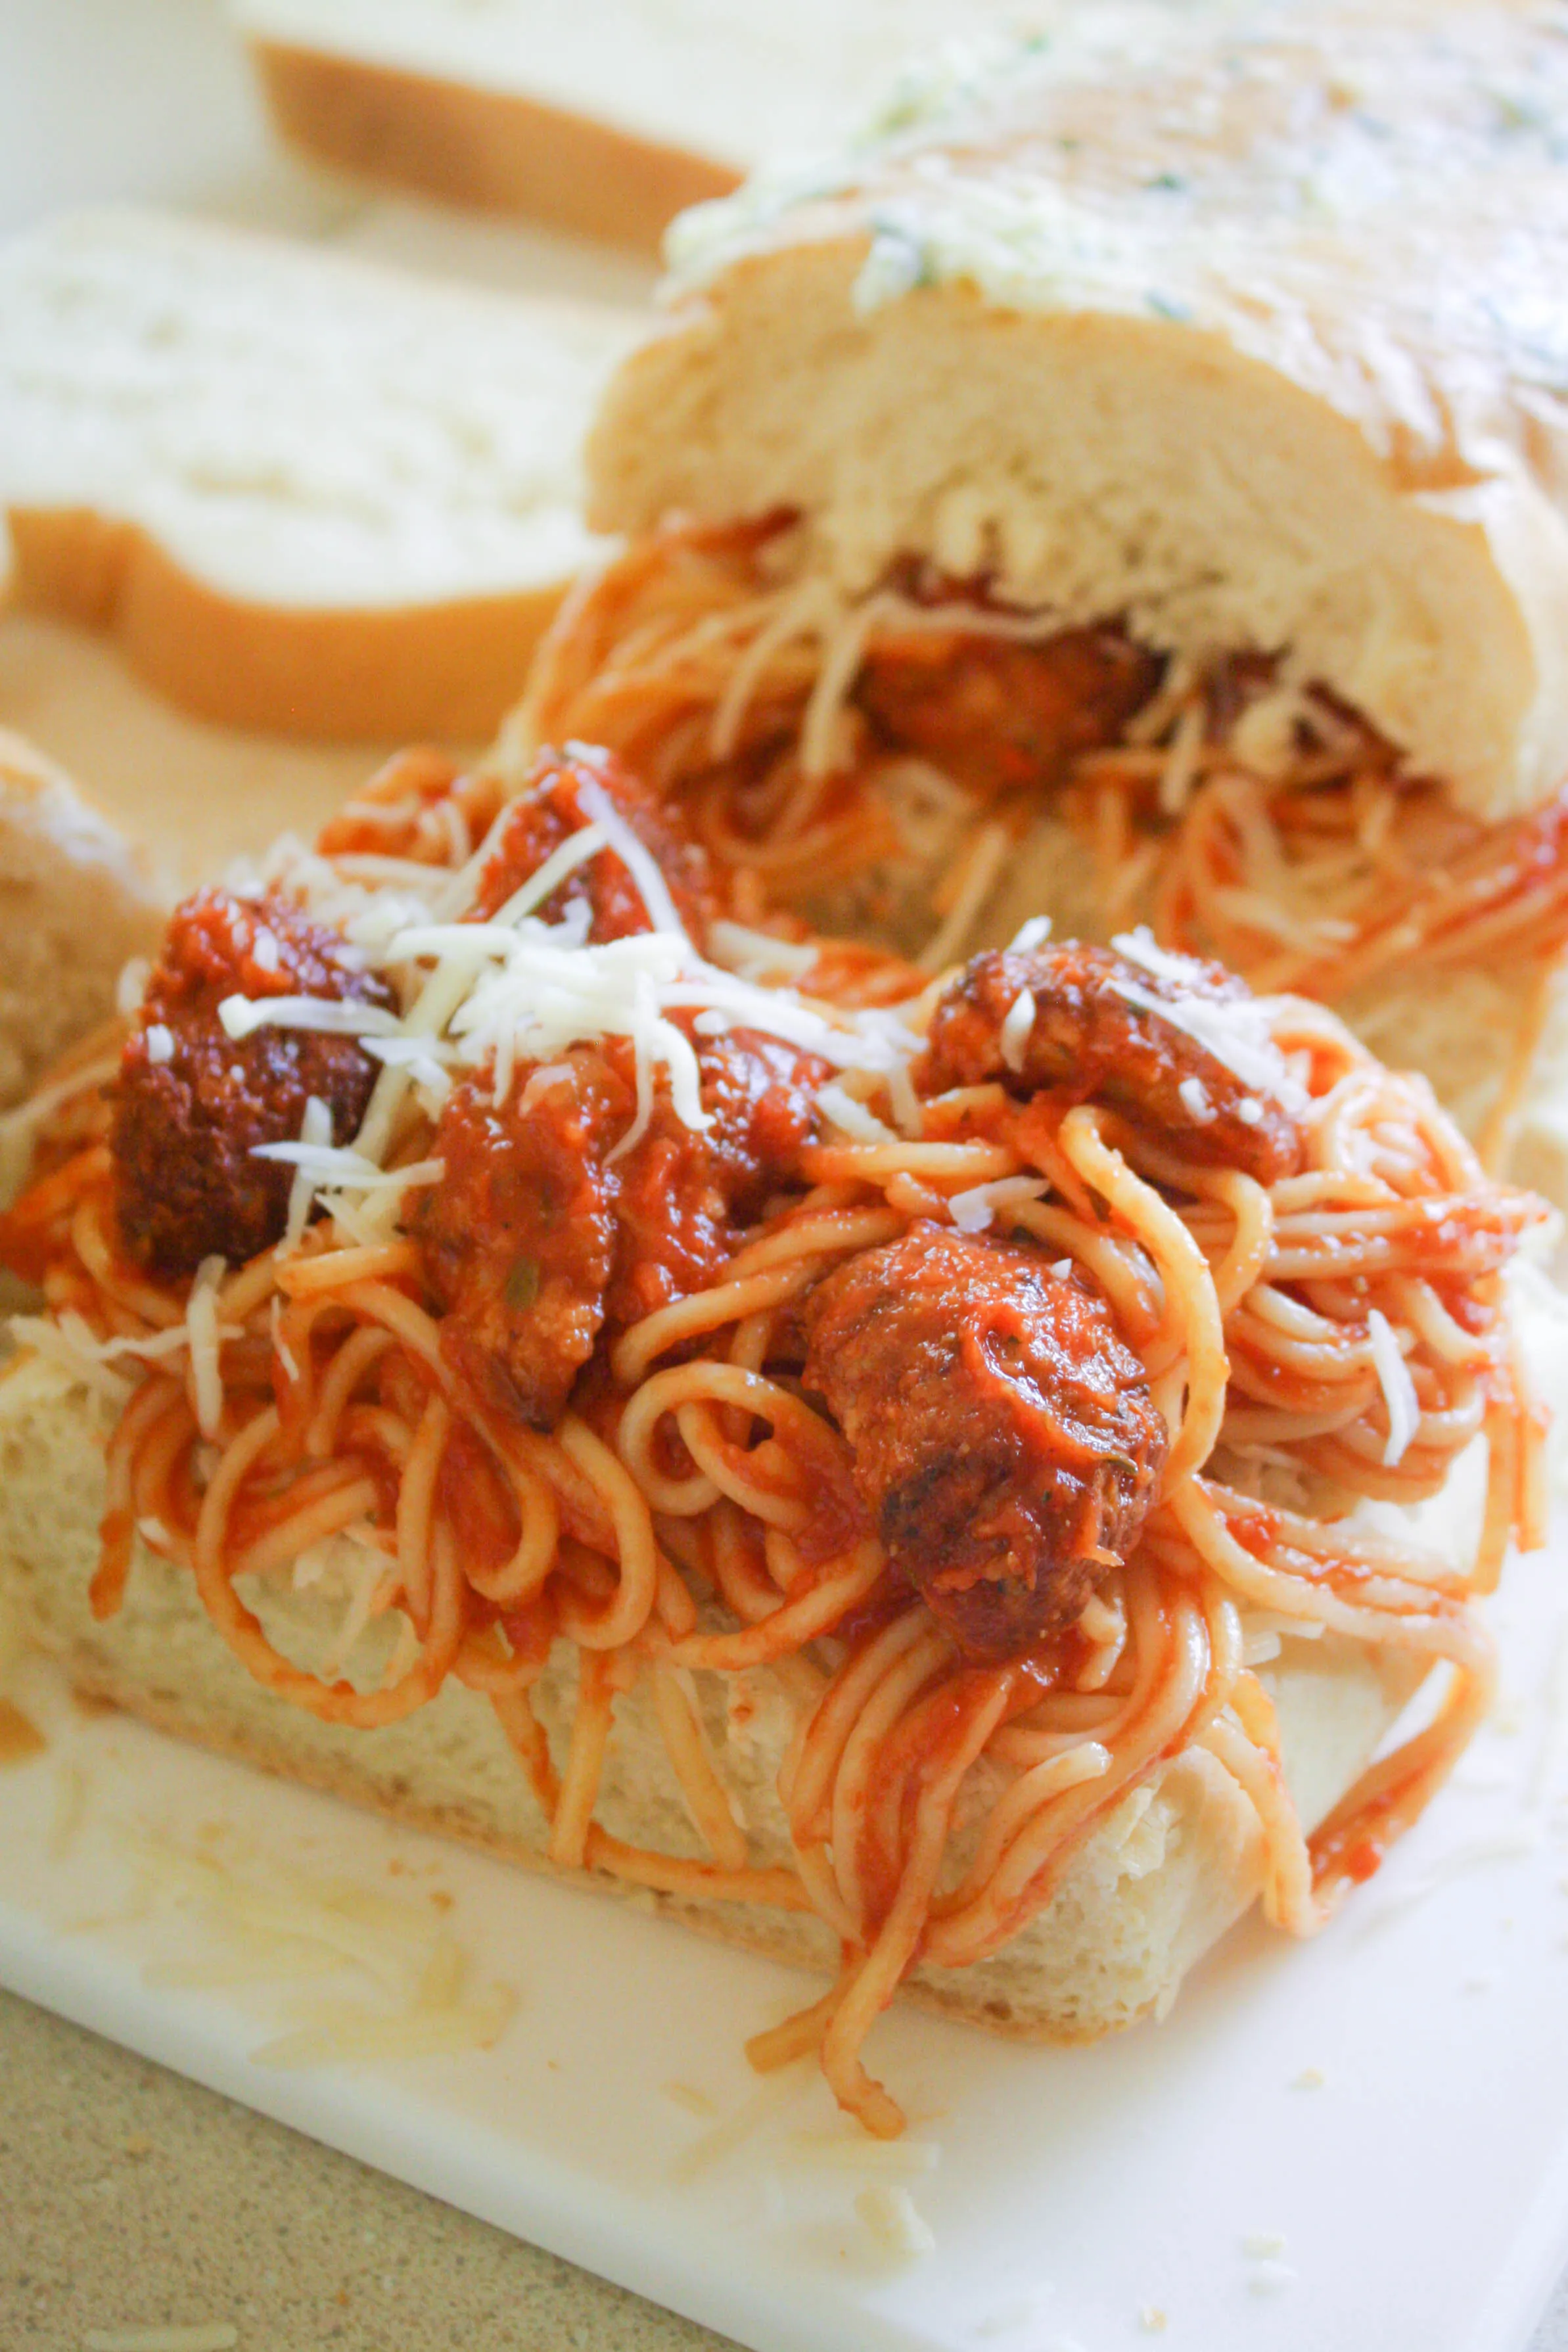 Leftover Spaghetti & Meatball Panini is a great way to refresh your leftovers! You'll love this fun meal!